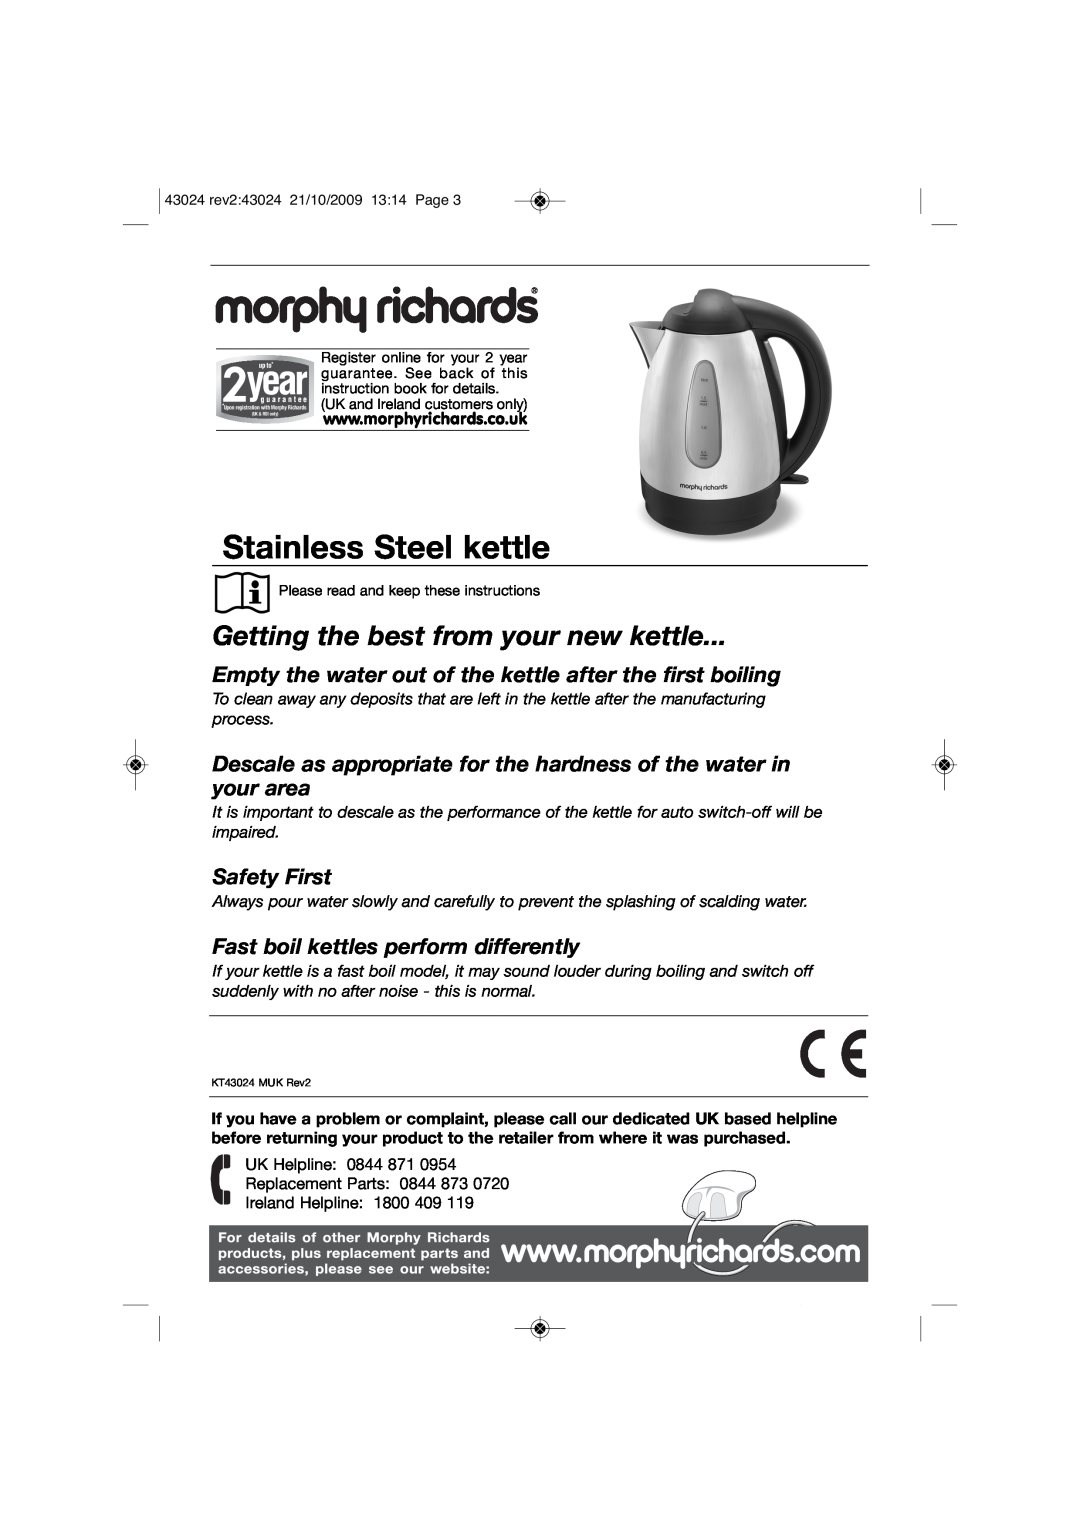 Morphy Richards KT43024 manual Stainless Steel kettle, Getting the best from your new kettle, Safety First 